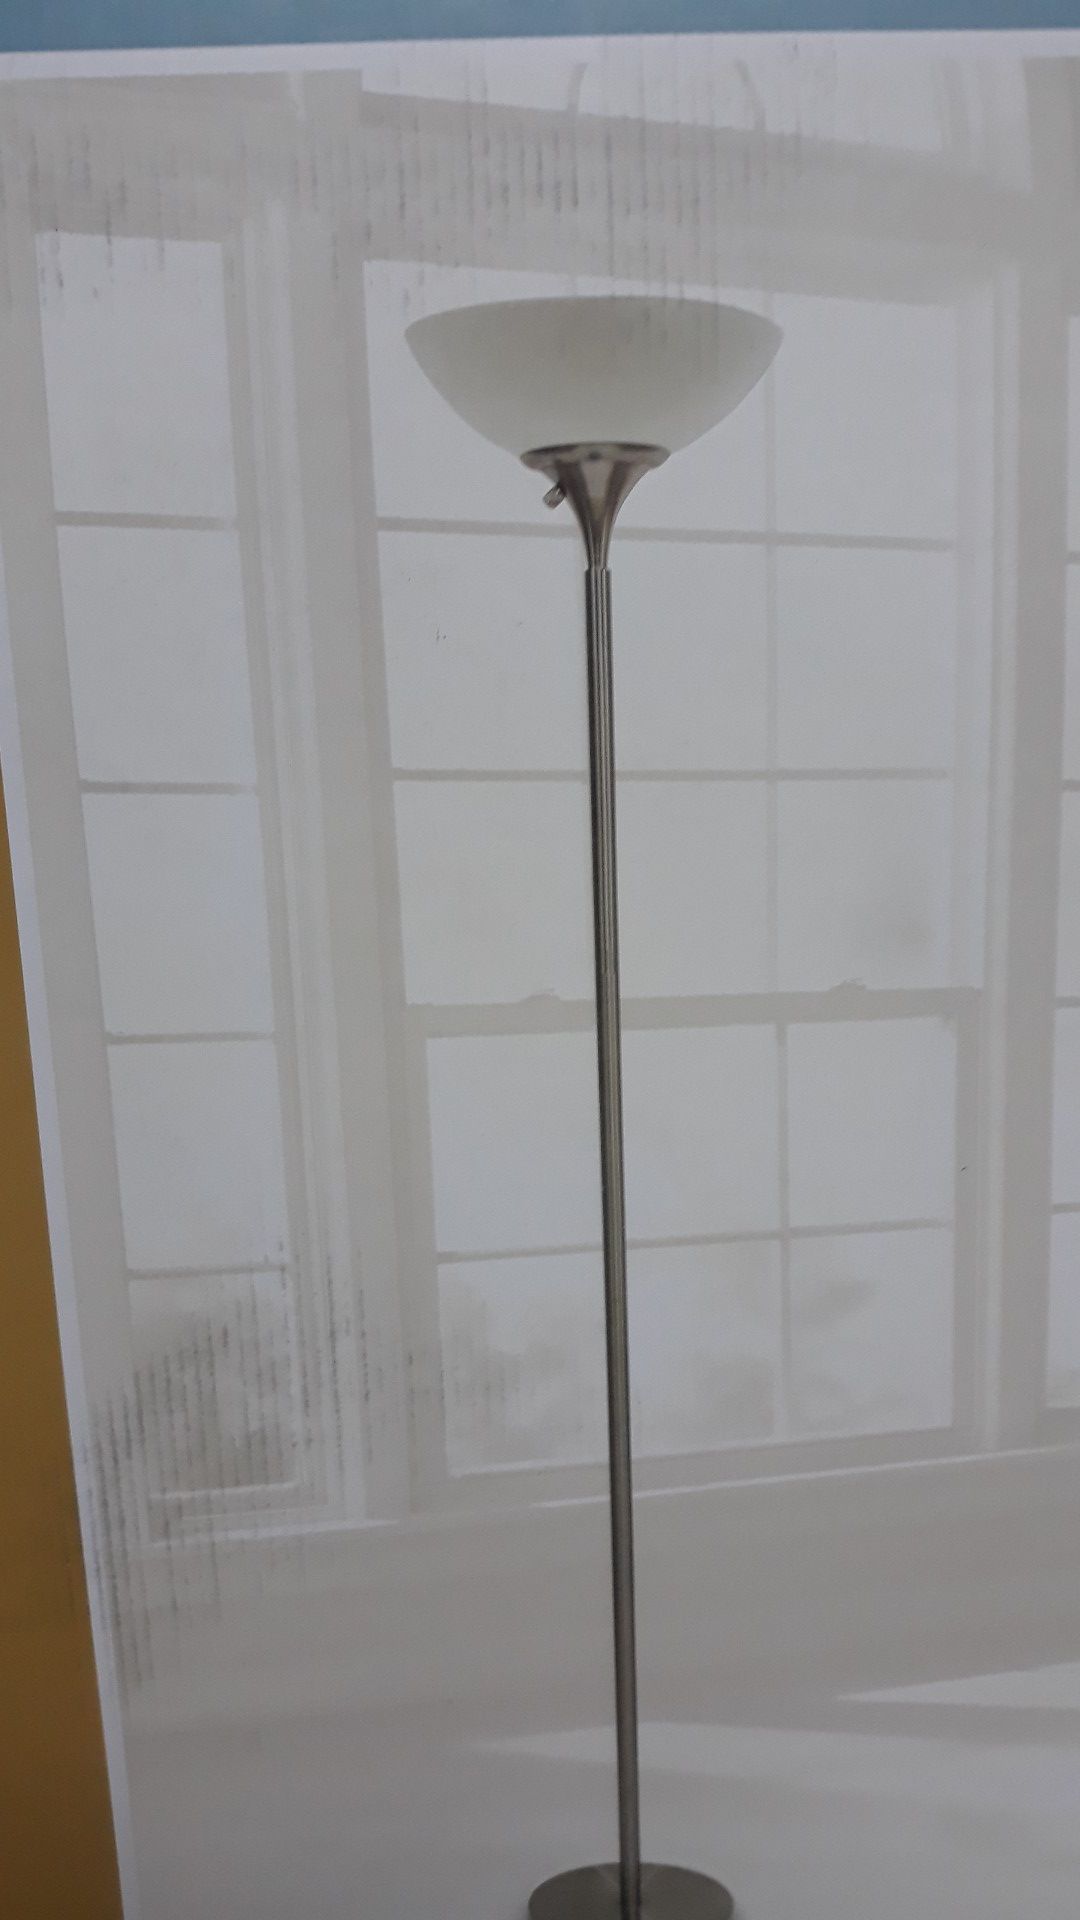 New in box 71 inch high floor lamp brushed nickel 798919046379